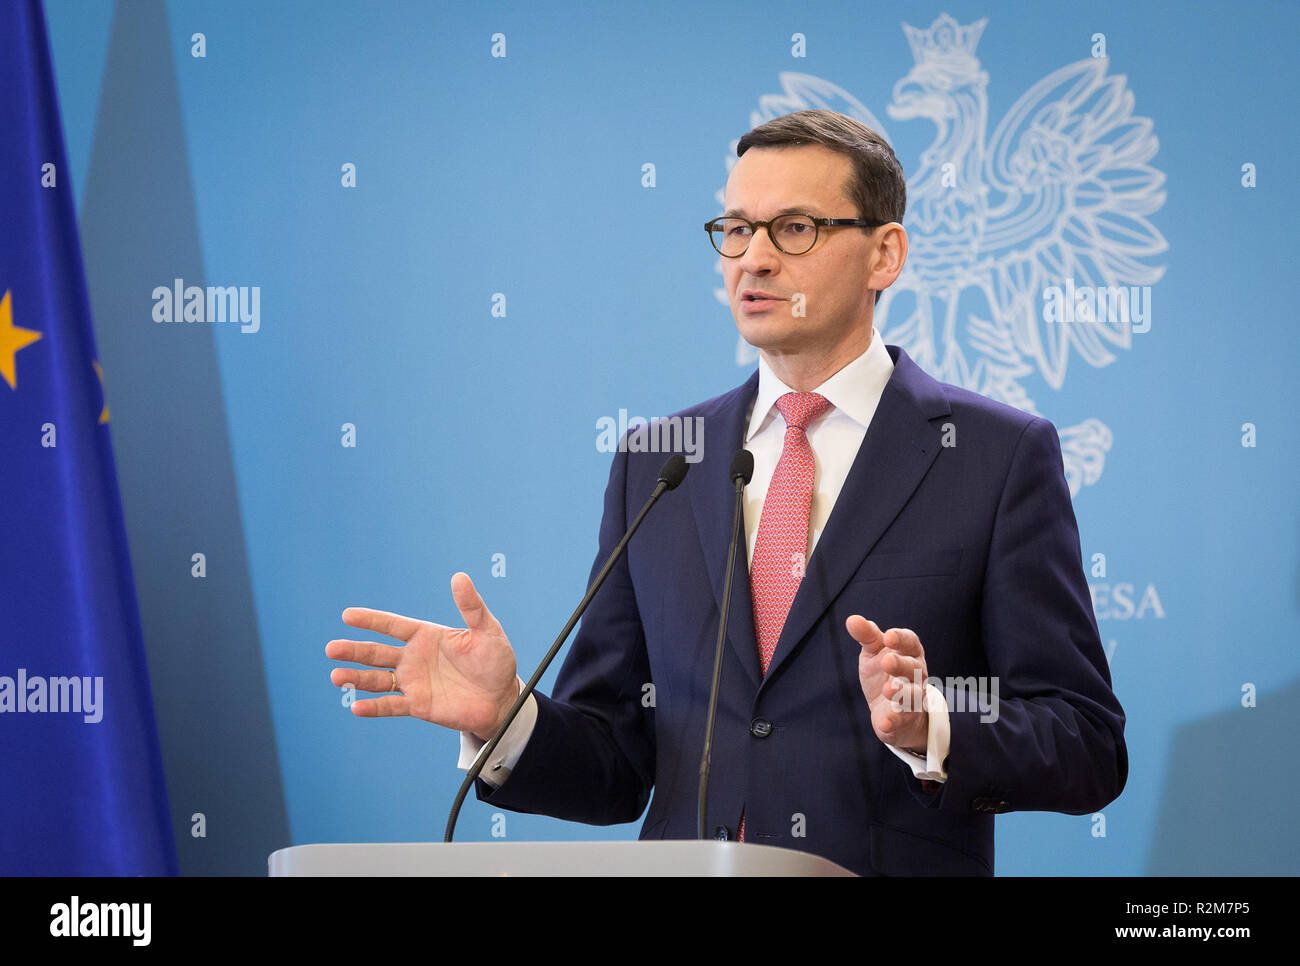 Prime Minister of Poland Mateusz Morawiecki during the press conference at Chancellery of the Prime Minister in Warsaw, Poland on 12 March 2018 Stock Photo